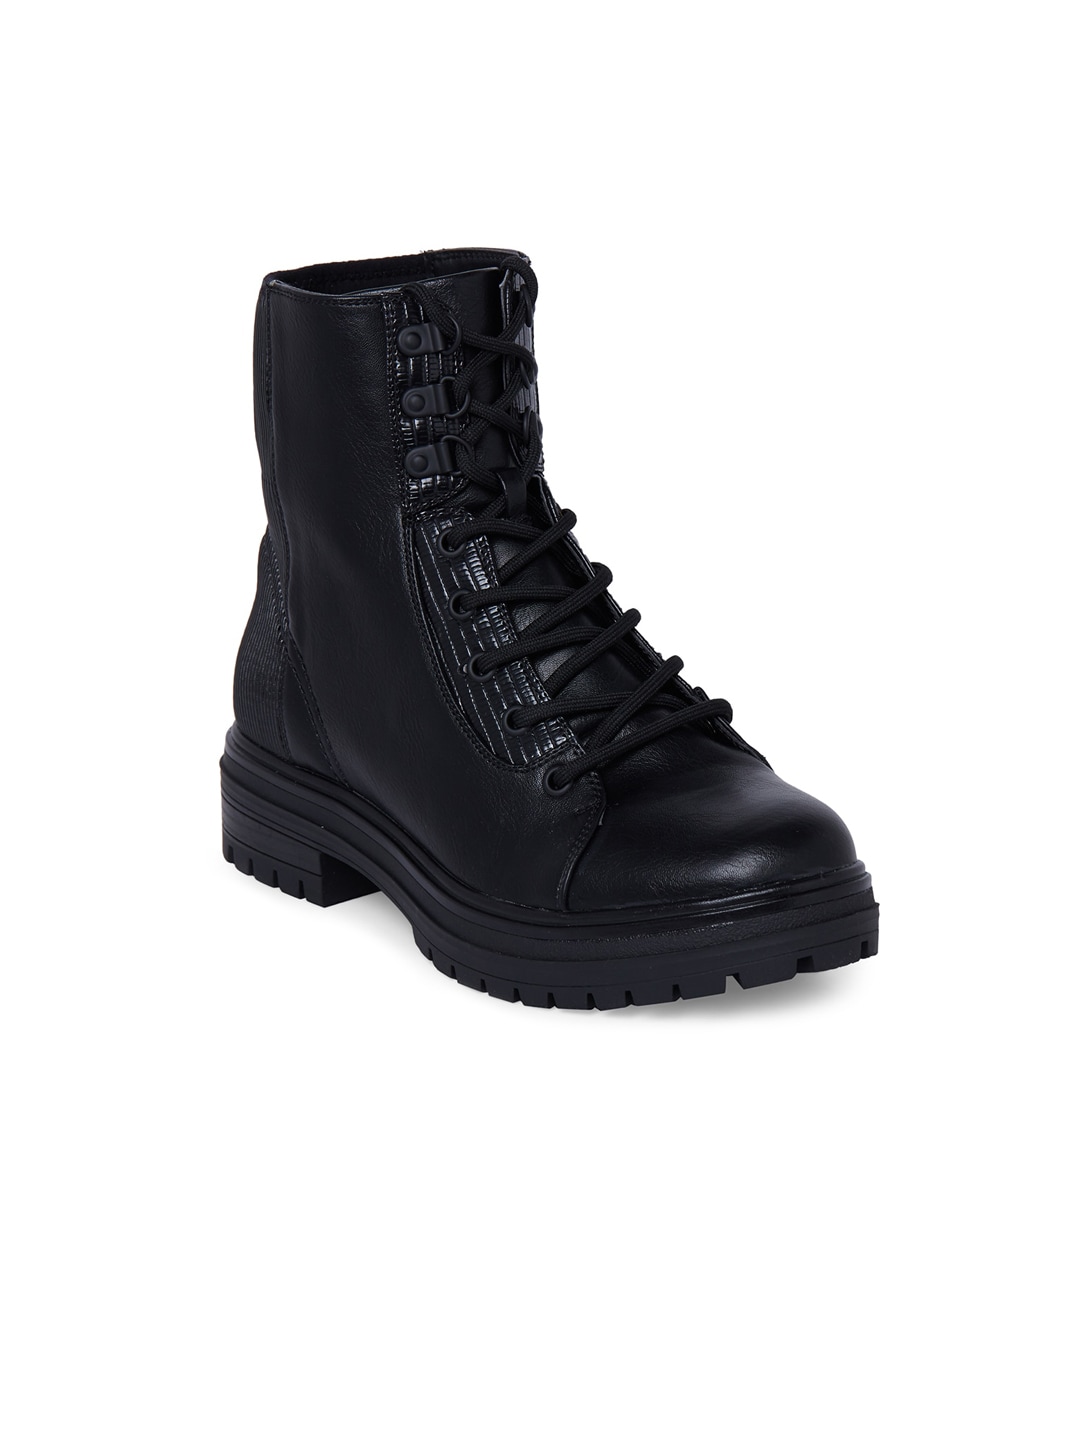 Call It Spring Women Black Flat Boots Price in India